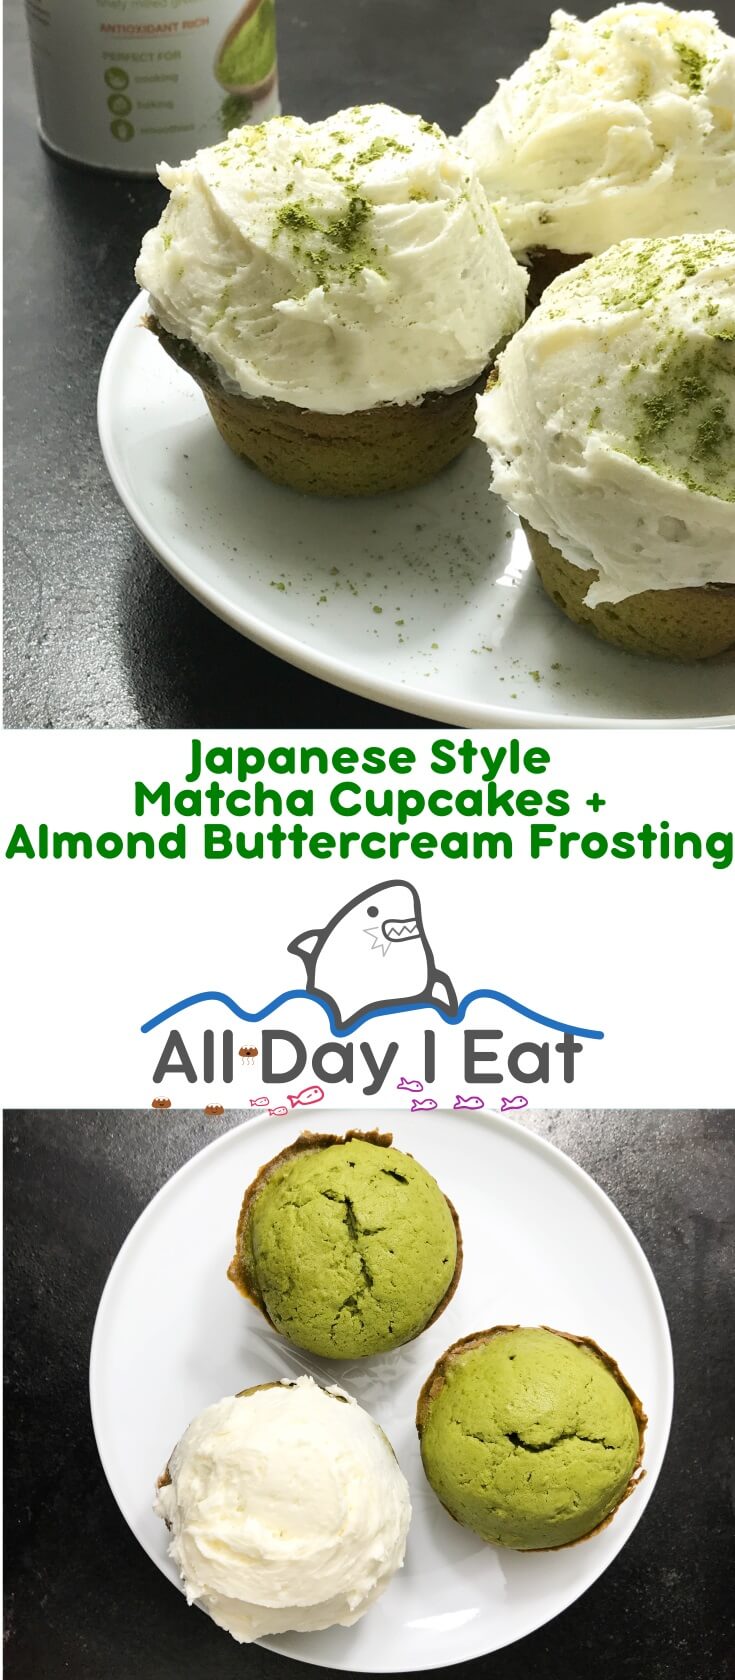 Japanese Style Matcha Cupcakes with Almond Buttercream Frosting. Increase your tea intake and enjoy the taste of these light, fluffy green cupcakes that are perfectly topped with aromatic almond frosting | www.alldayieat.com